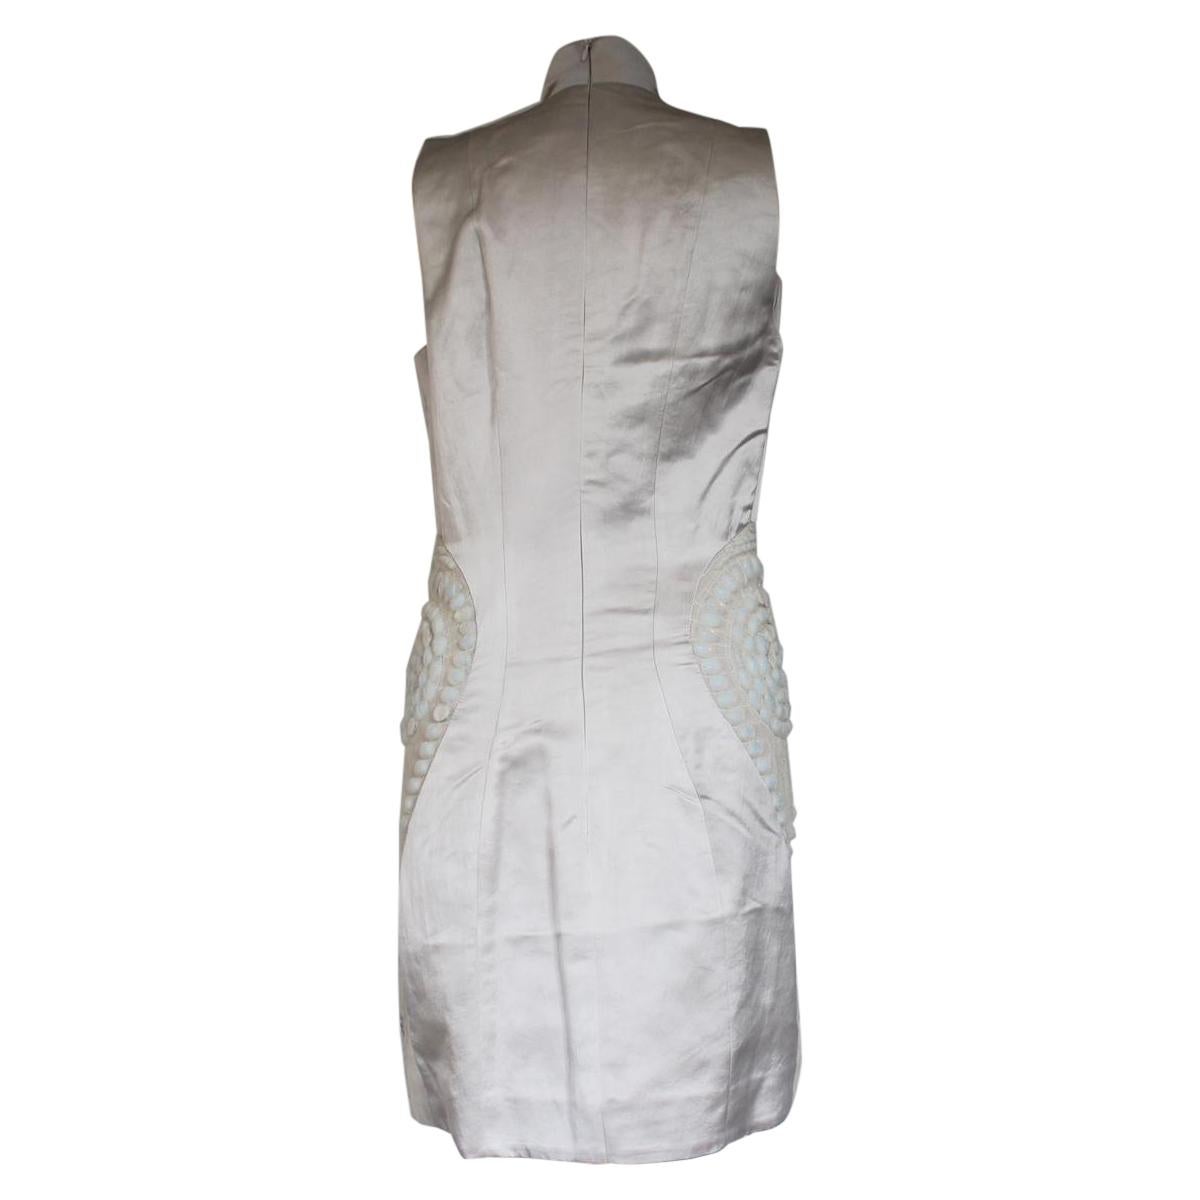 Beautiful dress by Iris van Herpen
Silk (70%) Wool (15%) Cotton (10%) Nylon
Pearl grey color
Sleeveless
Manufacture with stones on the sides
Total length cm 90 (35.4 inches)
Worldwide express shipping included in the price !